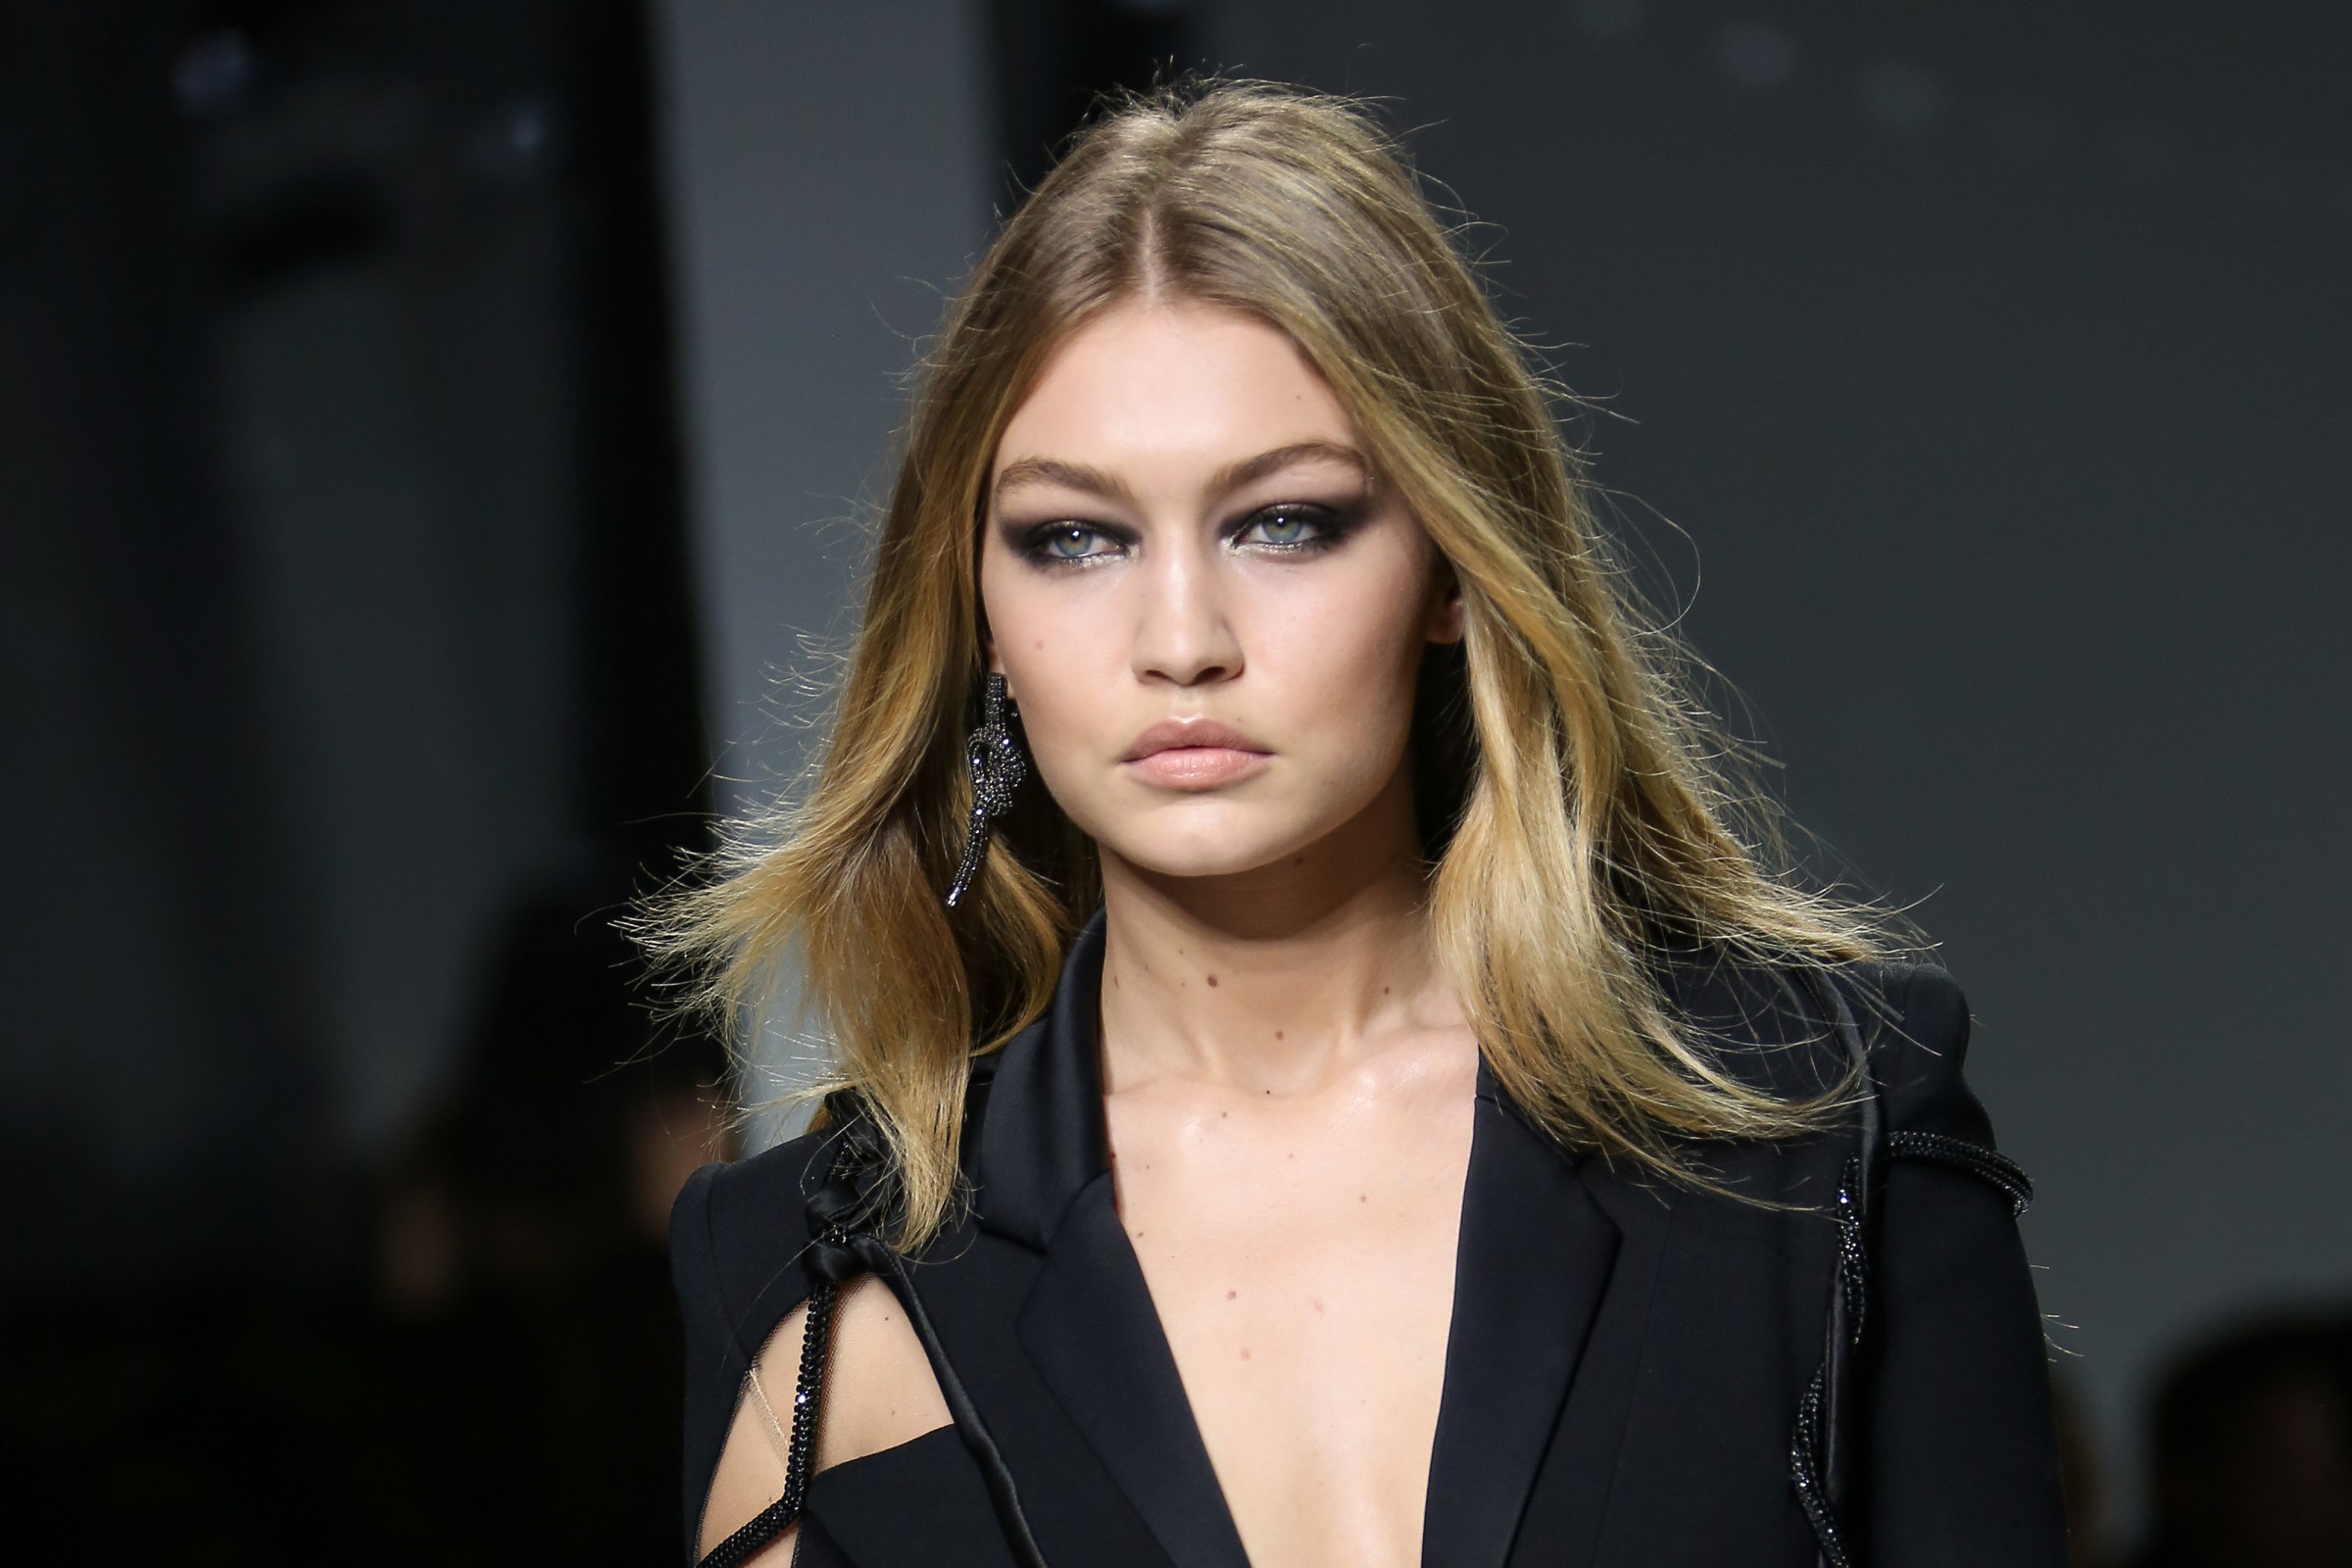 Who is the Atelier Versace Woman for 2016?